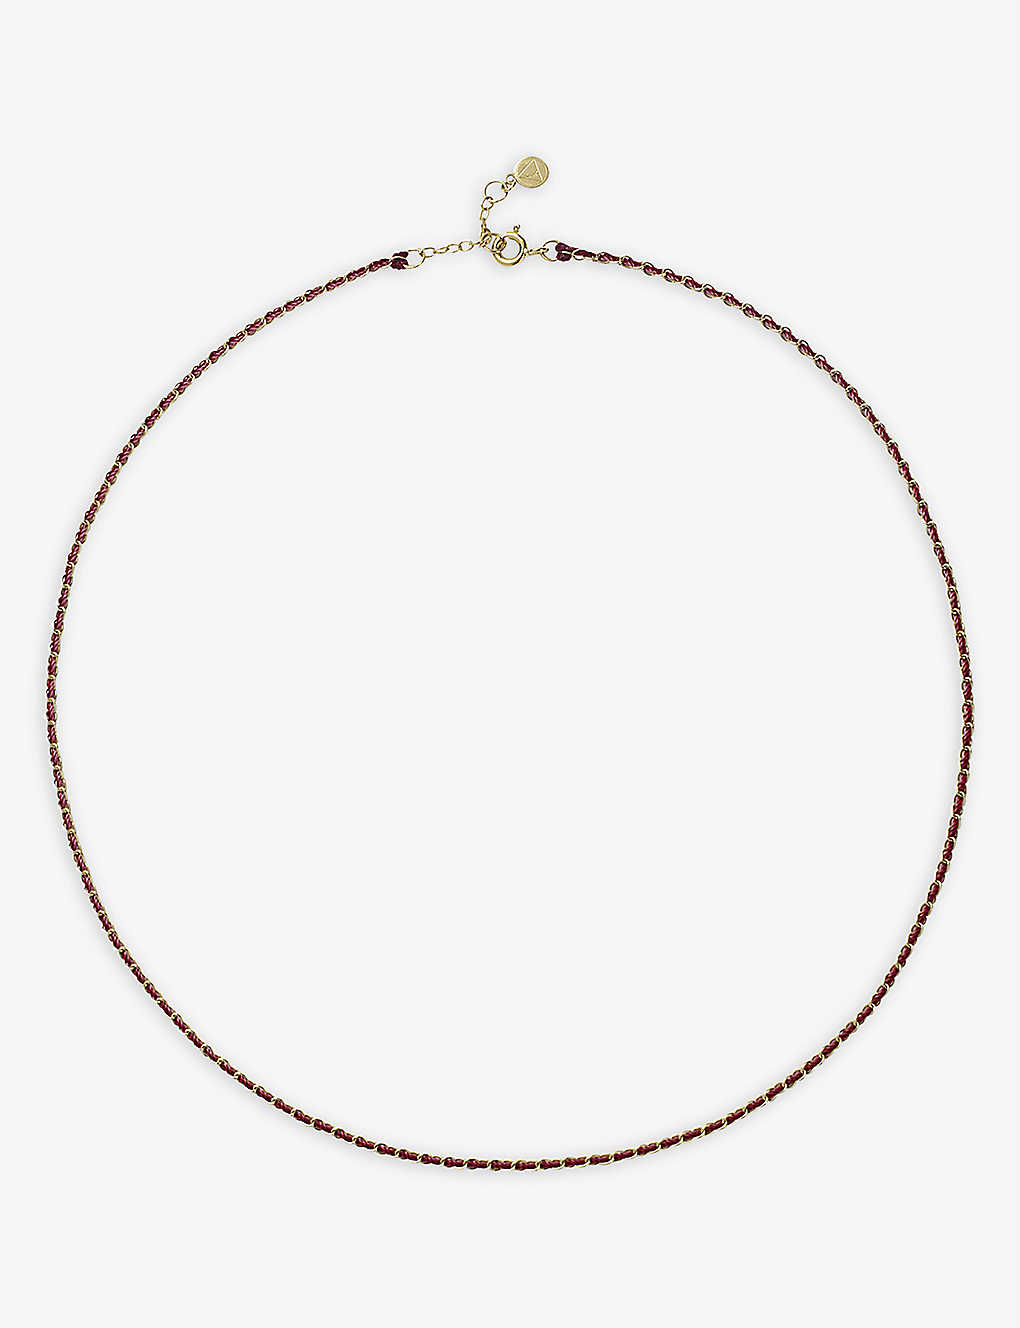 The Alkemistry Auric Love 18ct Yellow Gold And Thread Necklace